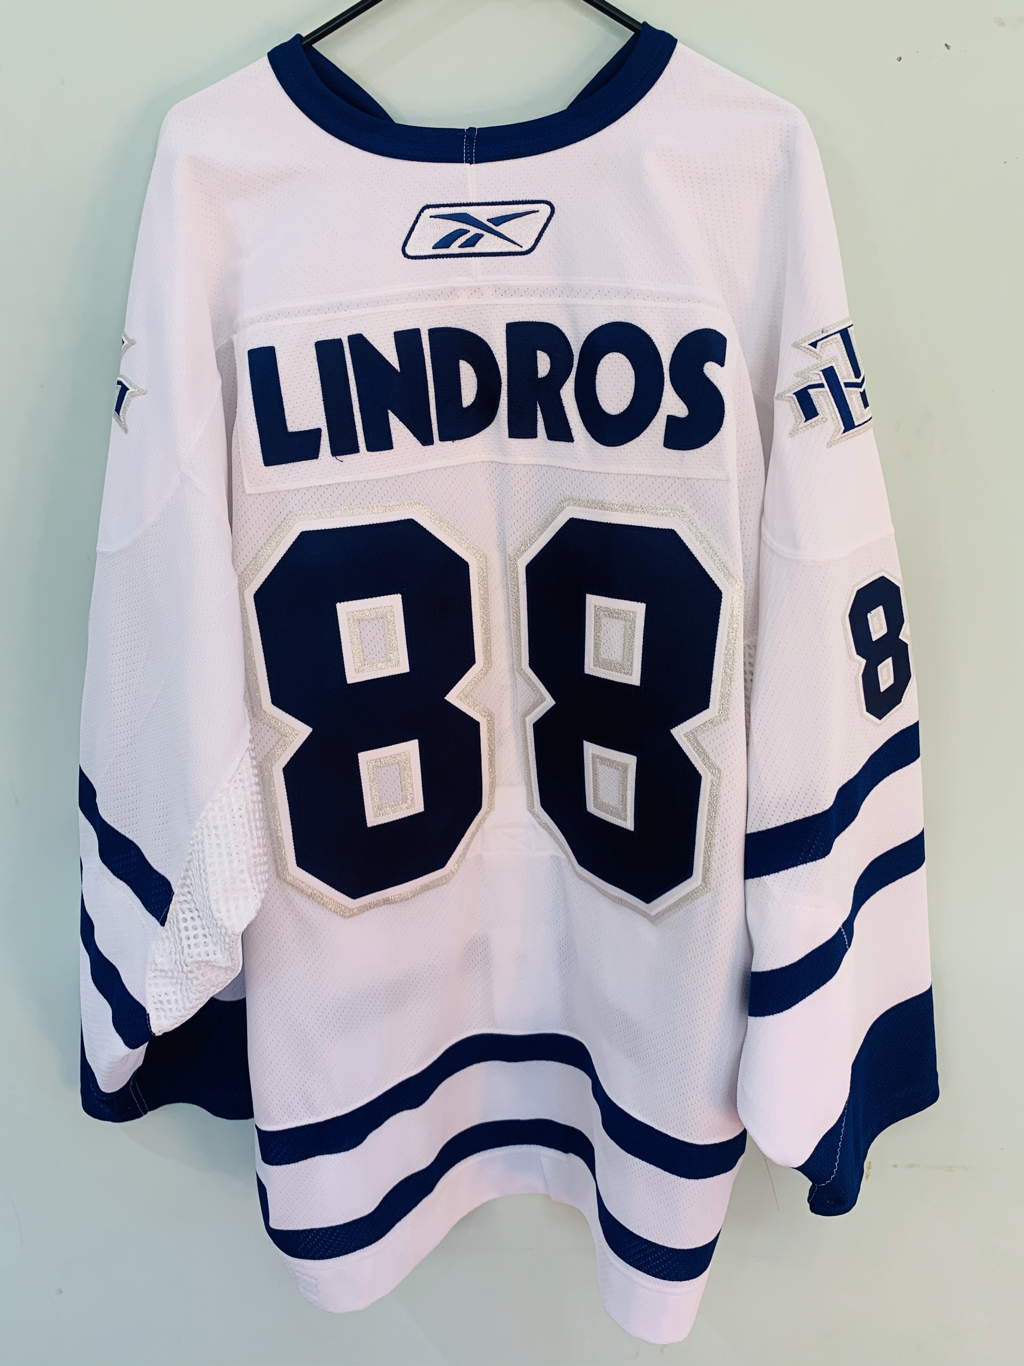 Eric Lindros Toronto Maple Leafs Vintage CCM Hockey Jersey 